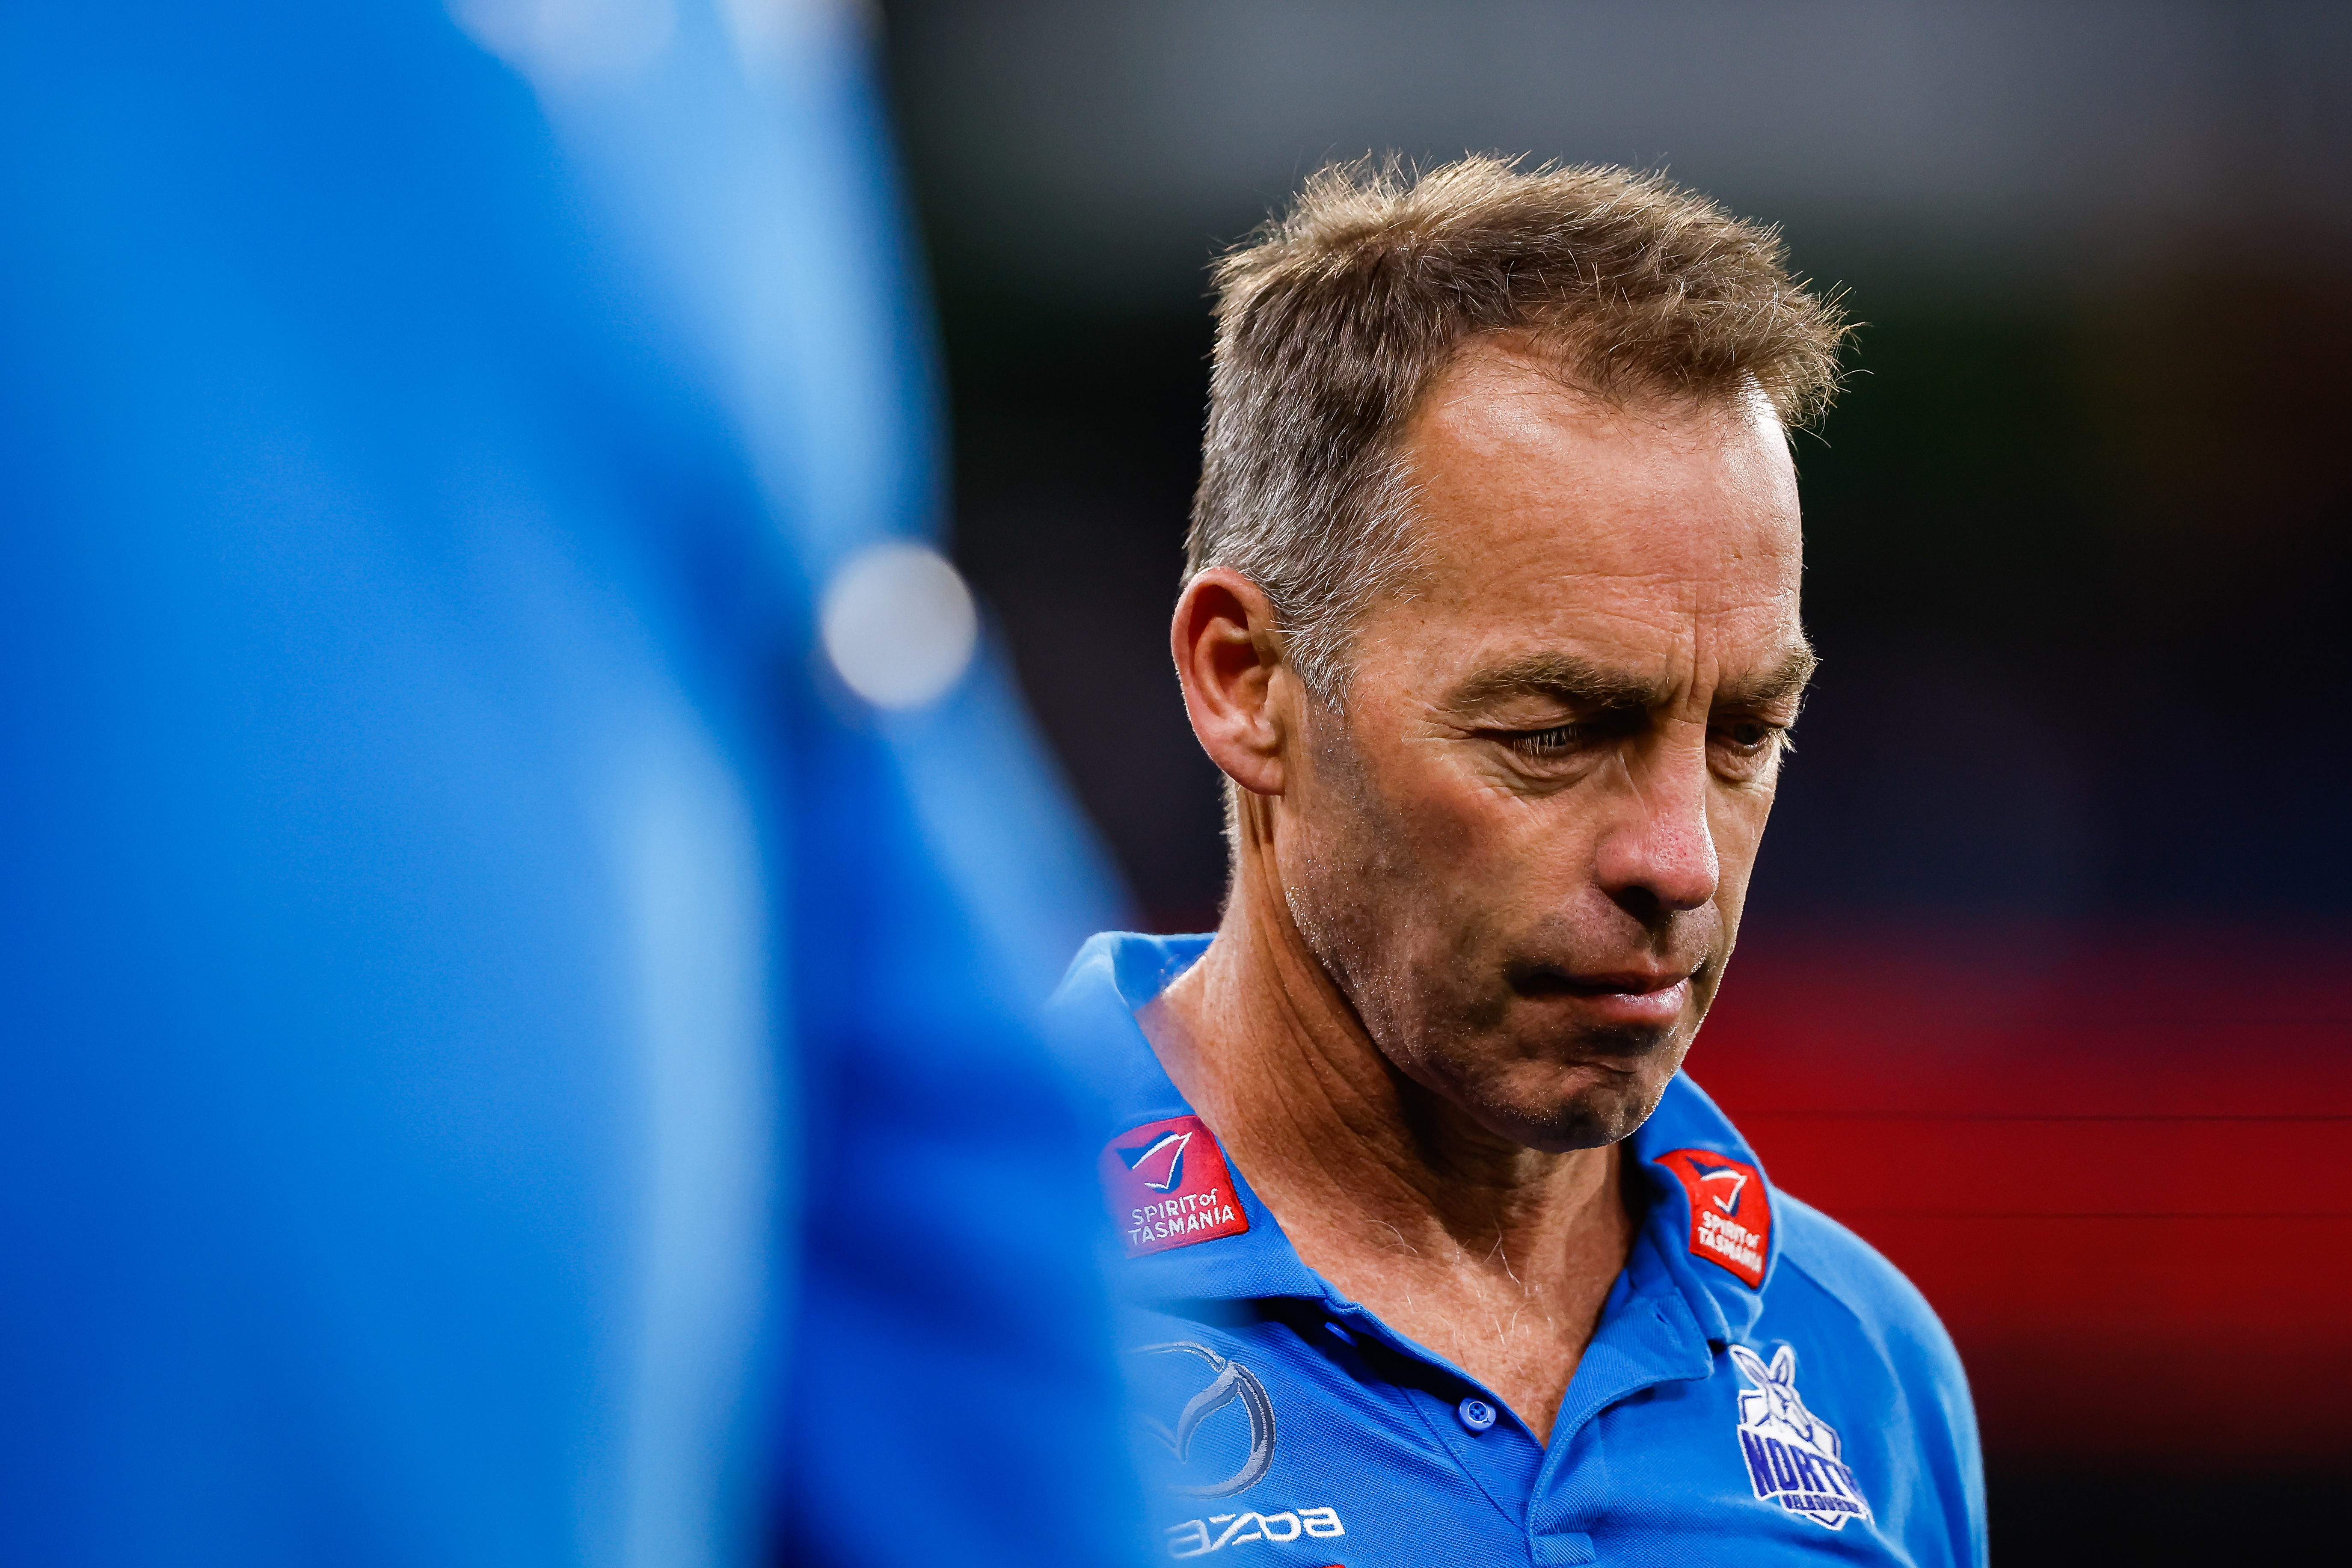 MELBOURNE, AUSTRALIA - APRIL 29: Alastair Clarkson, Senior Coach of the Kangaroos leaves the field at half time during the 2023 AFL Round 07 match between the Melbourne Demons and the North Melbourne Kangaroos at the Melbourne Cricket Ground on April 29, 2023 in Melbourne, Australia. (Photo by Dylan Burns/AFL Photos)